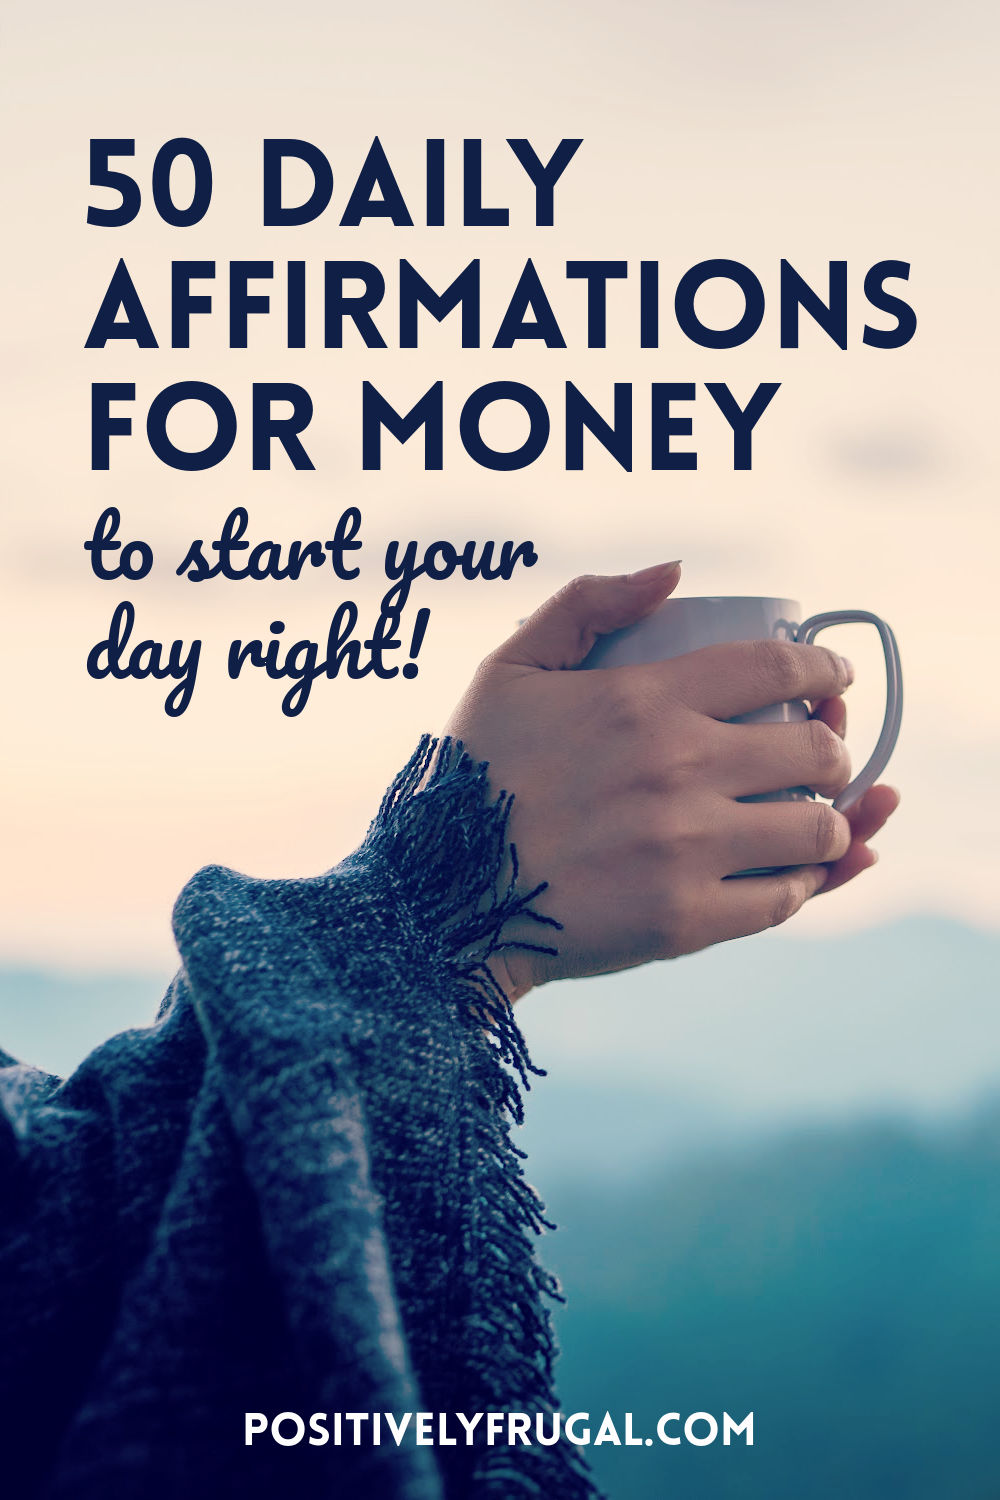 50 Daily Affirmations for Money by PositivelyFrugal.com